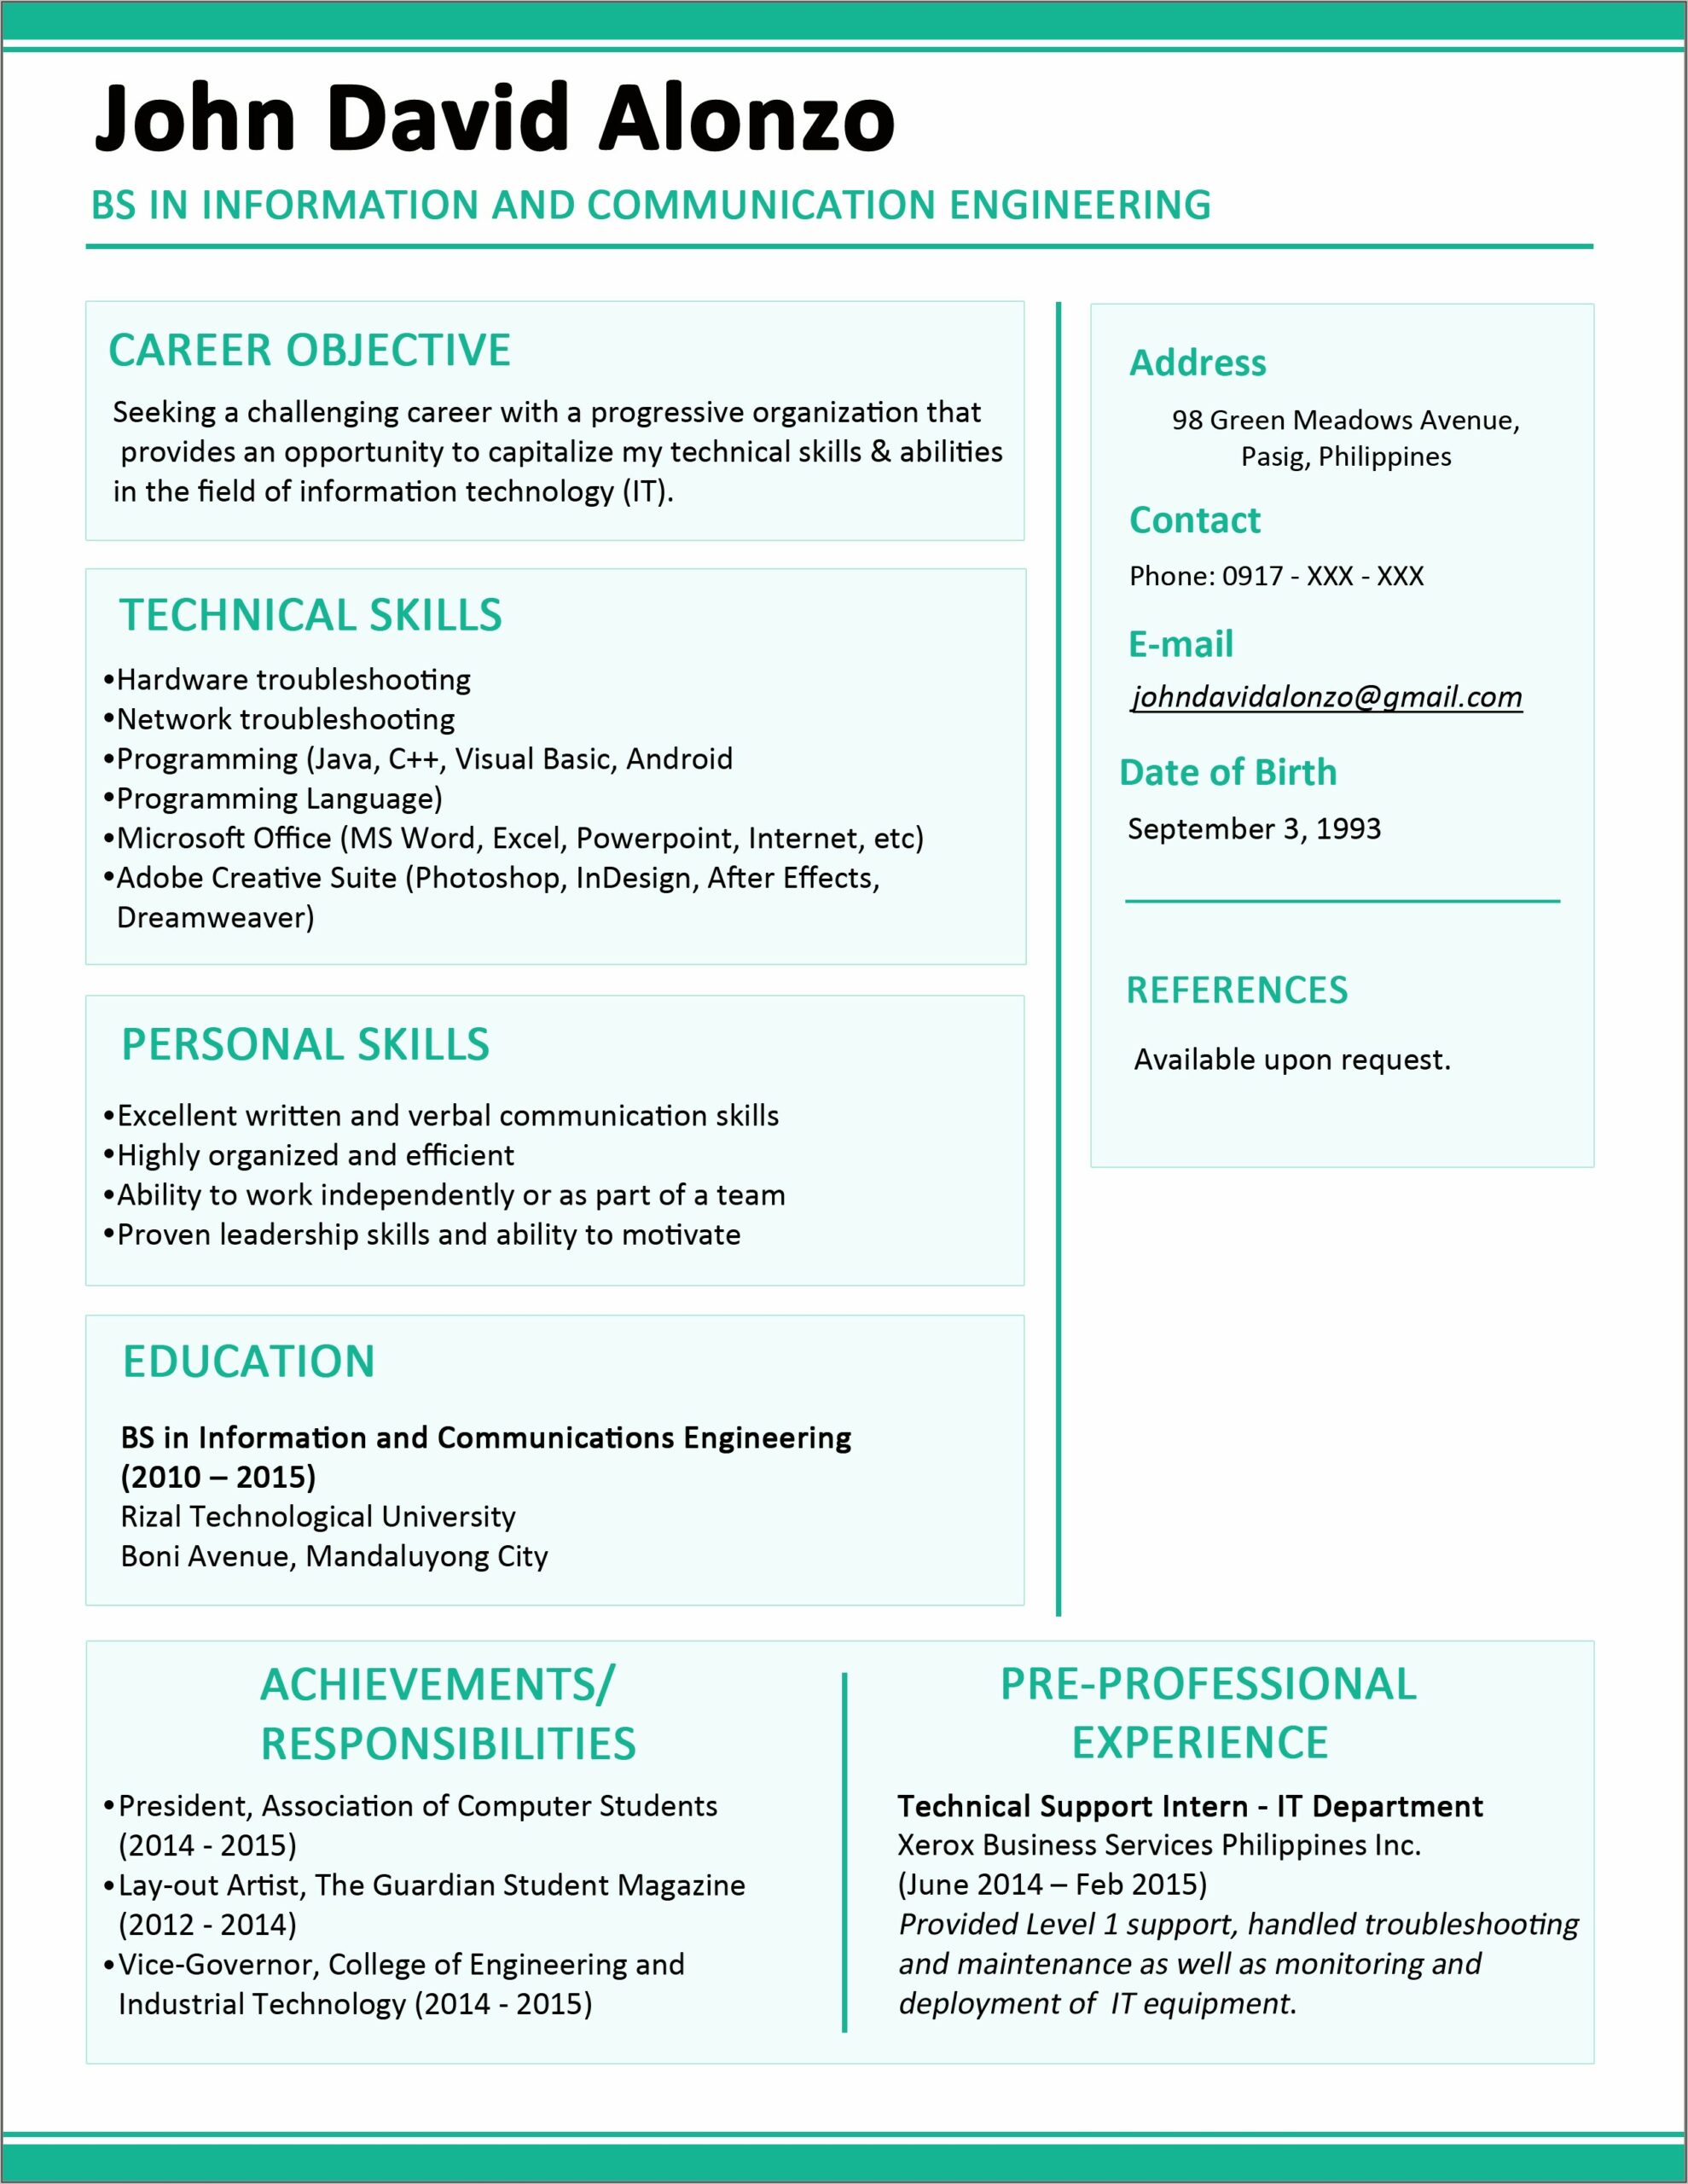 Copiable Resume Example For Staff Rn